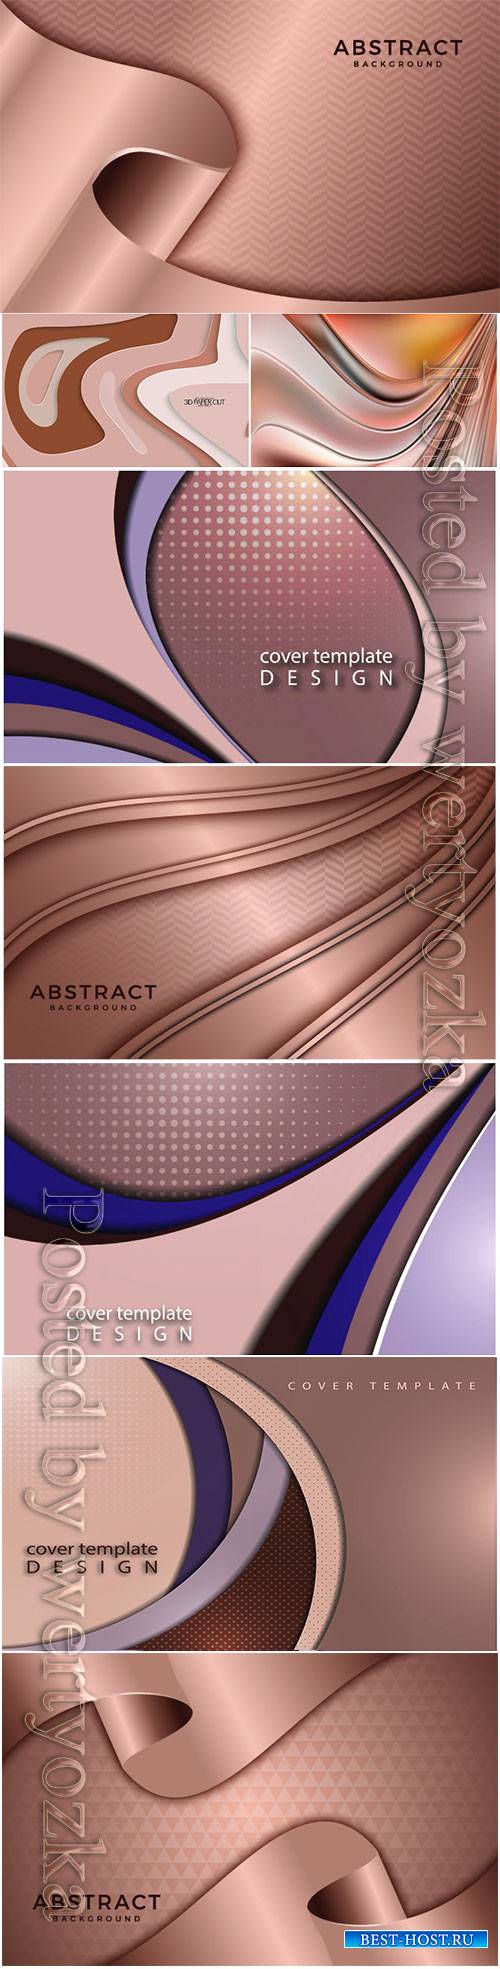 Metallic design for background and vector abstract poster